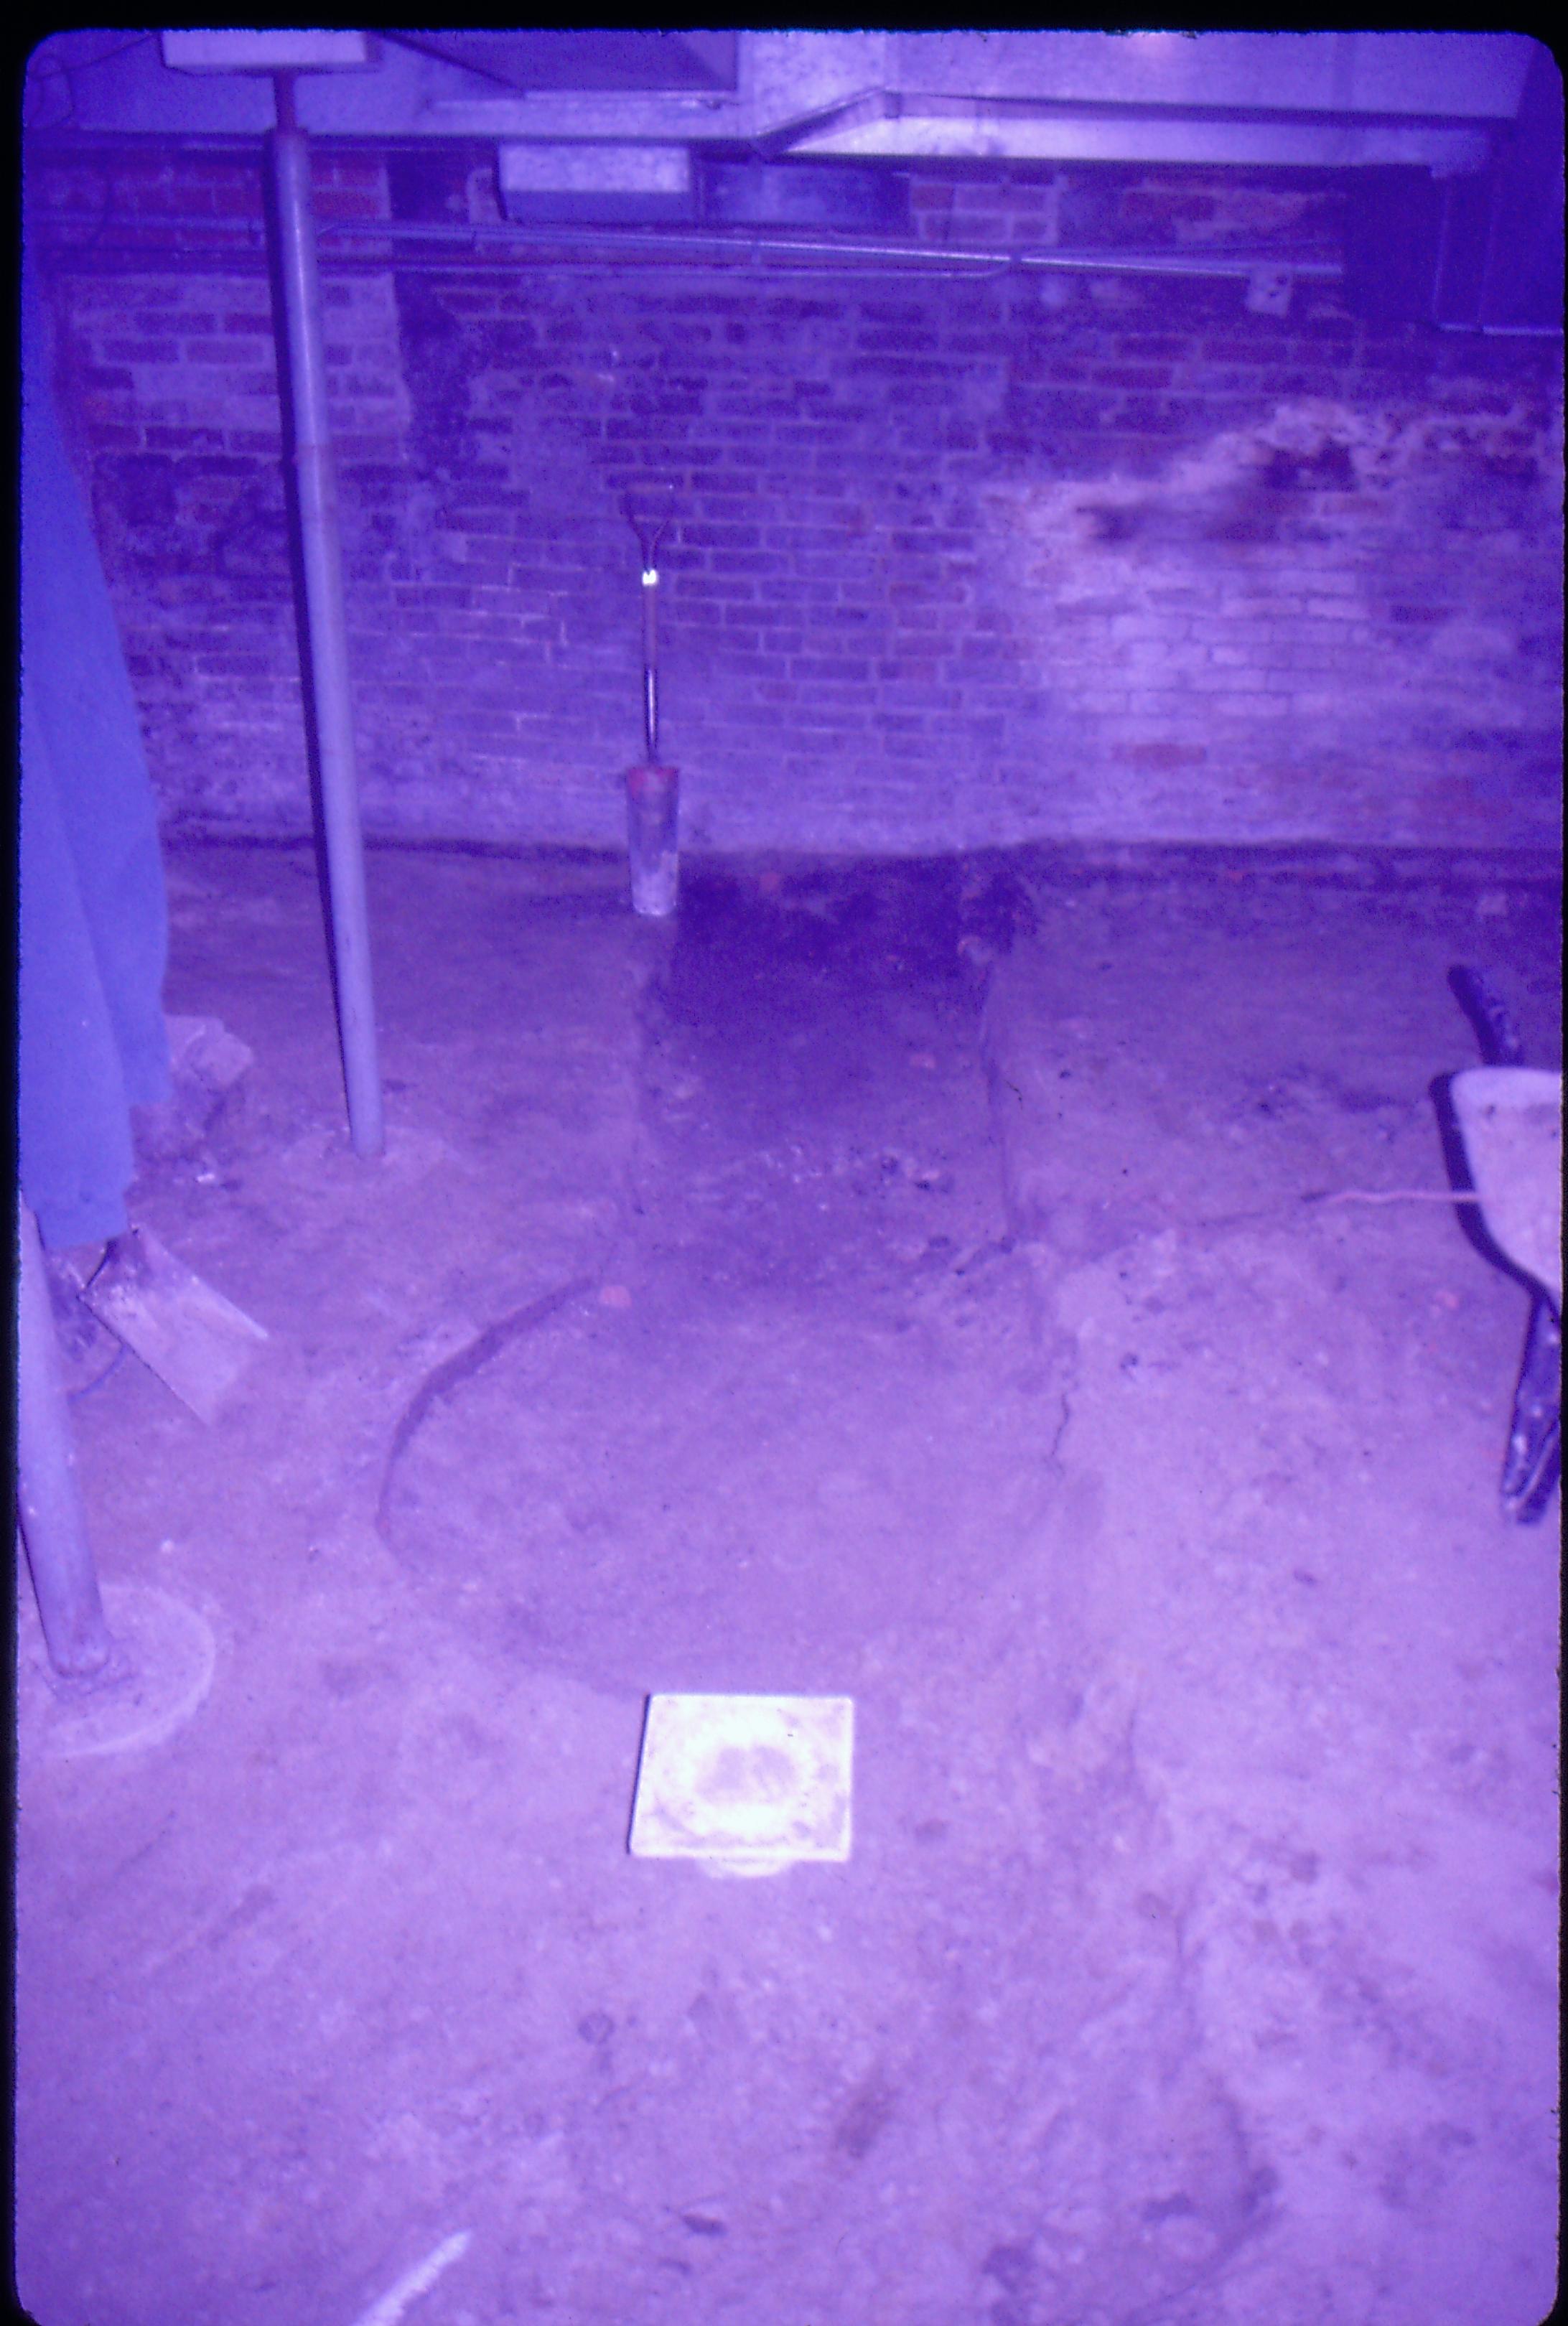 Lyon House - basement, brick cistern (or gravity furnace) remnants in floor. Metal supports on left--one has blue jacket hanging from it. Shovel in background leaning against brick wall, duct work on ceiling. Square plastic drain cover in foreground. Wheelbarrow on far right. Looking North in basement Lyon, Basement, brick wall, cistern, duct work, utilities